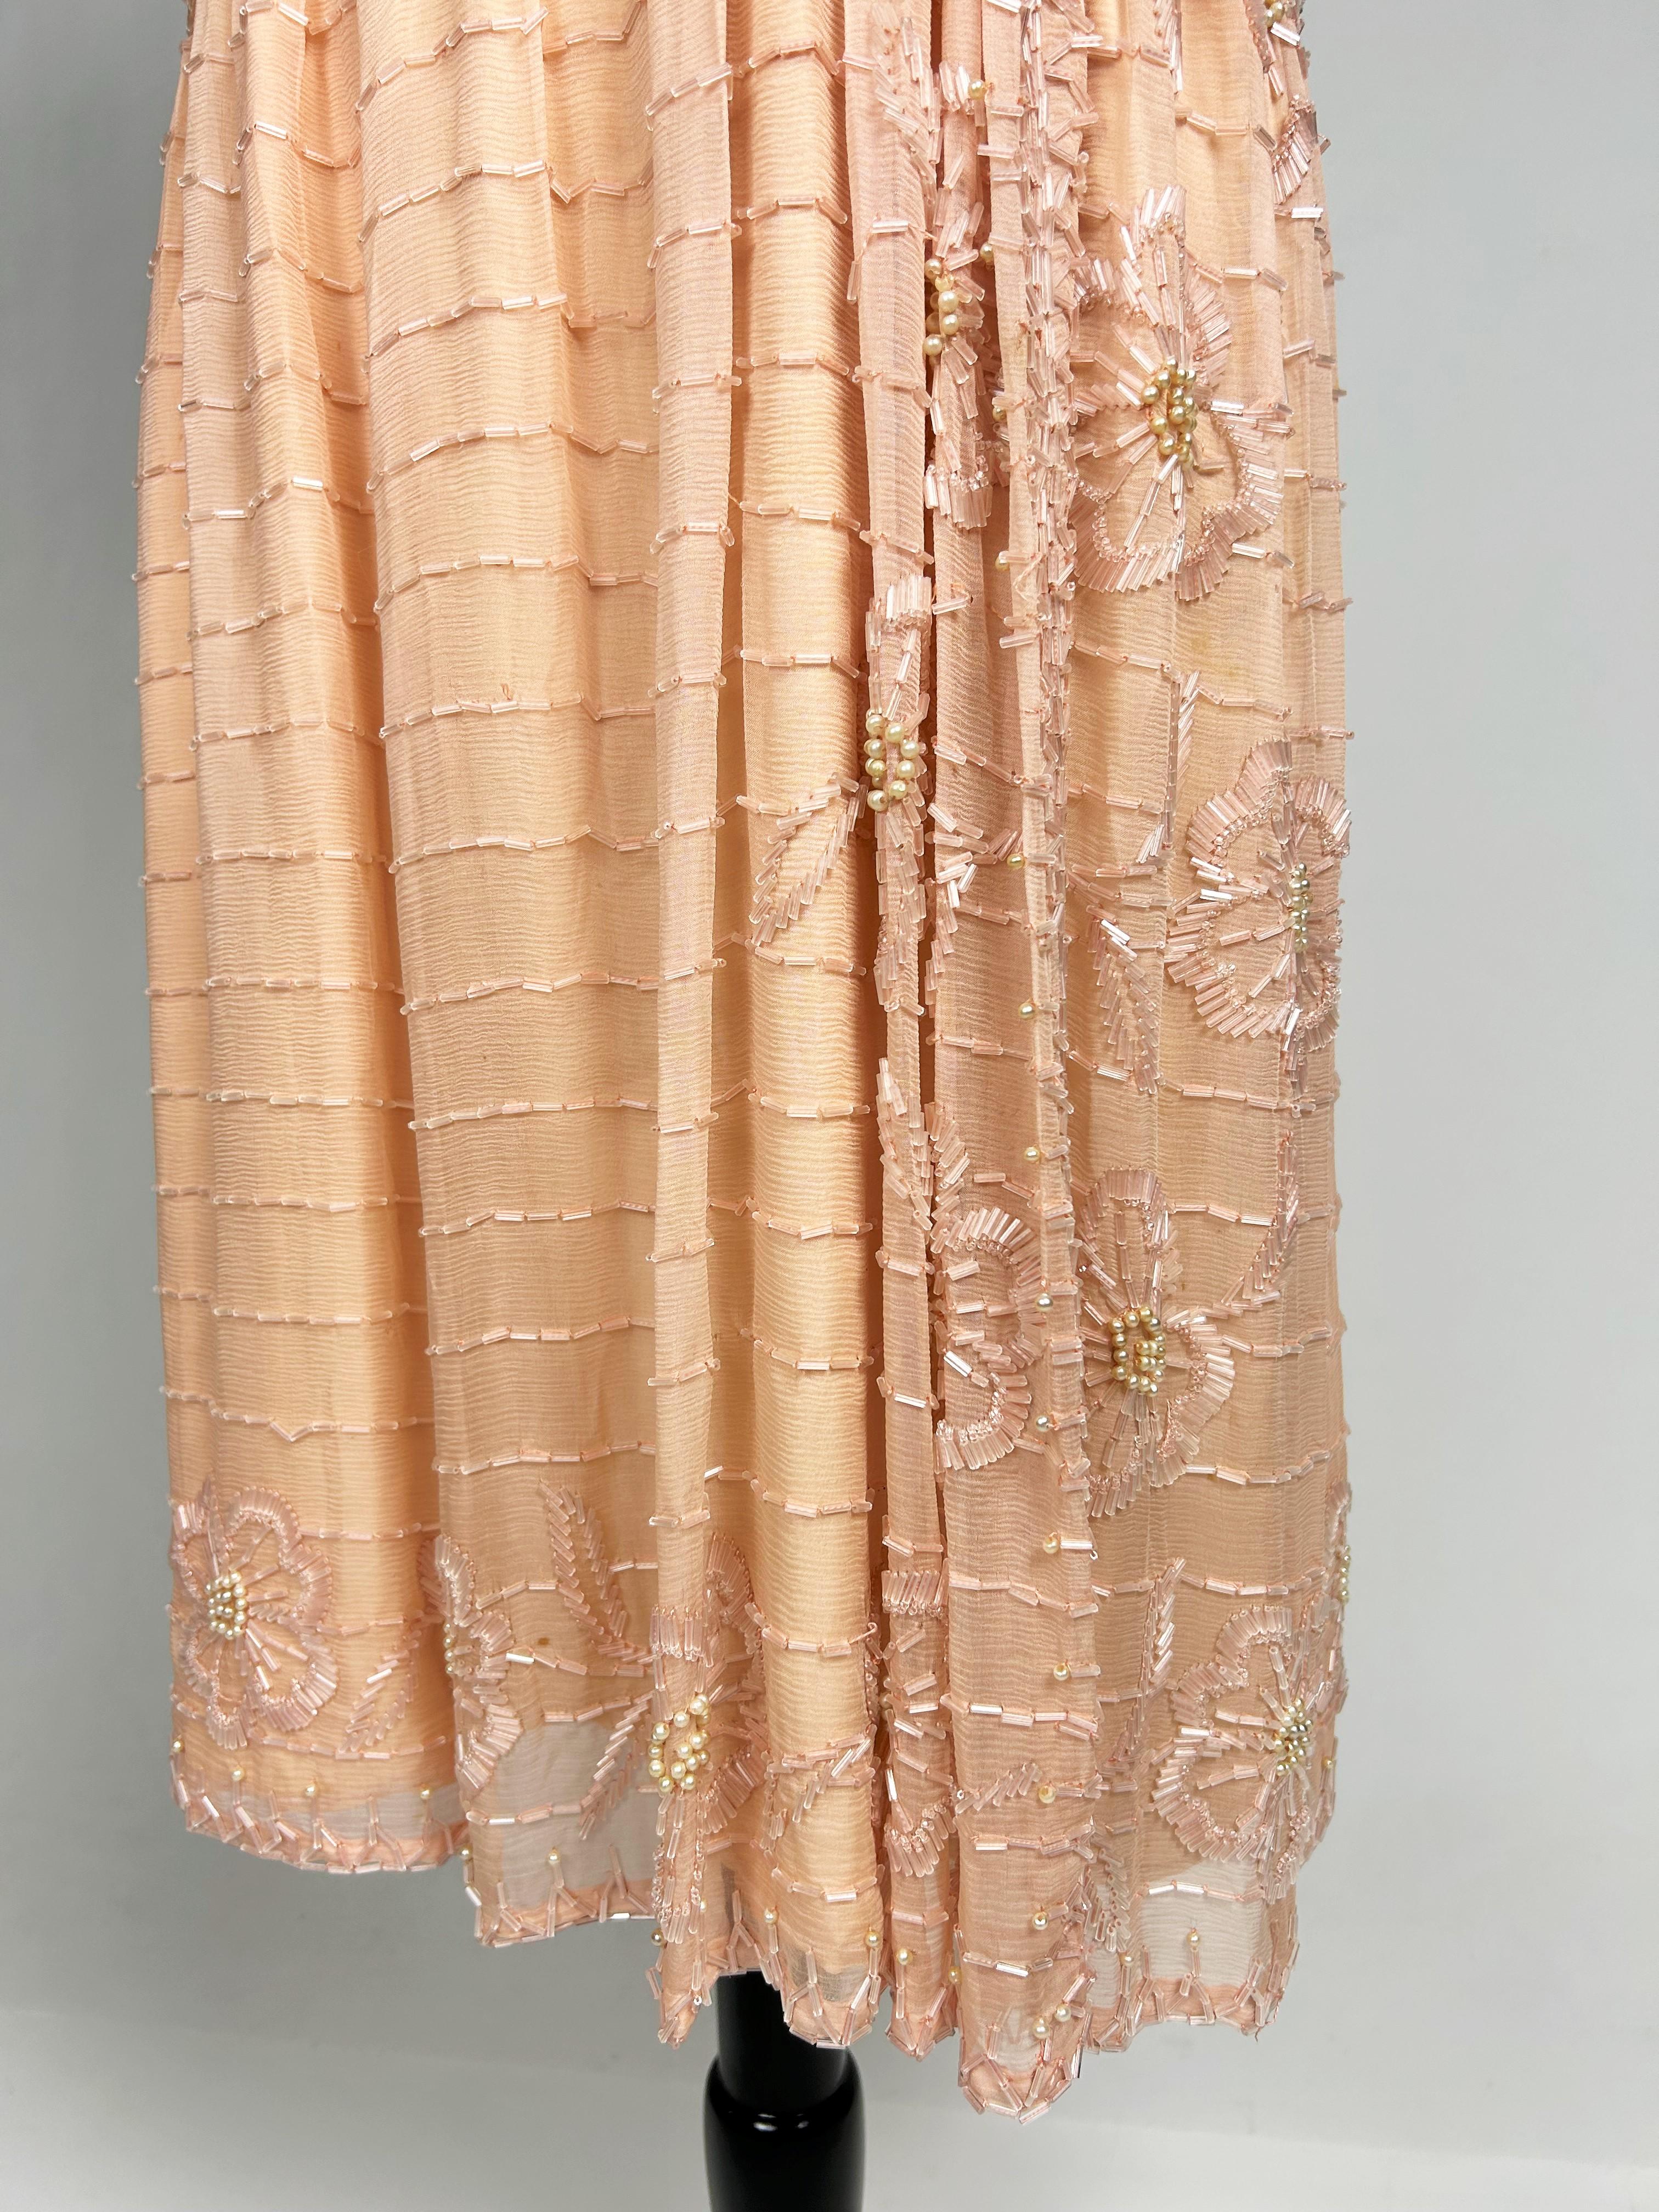 A Salmon embroidered Chiffon Flapper Dress - France Circa 1925 For Sale 3